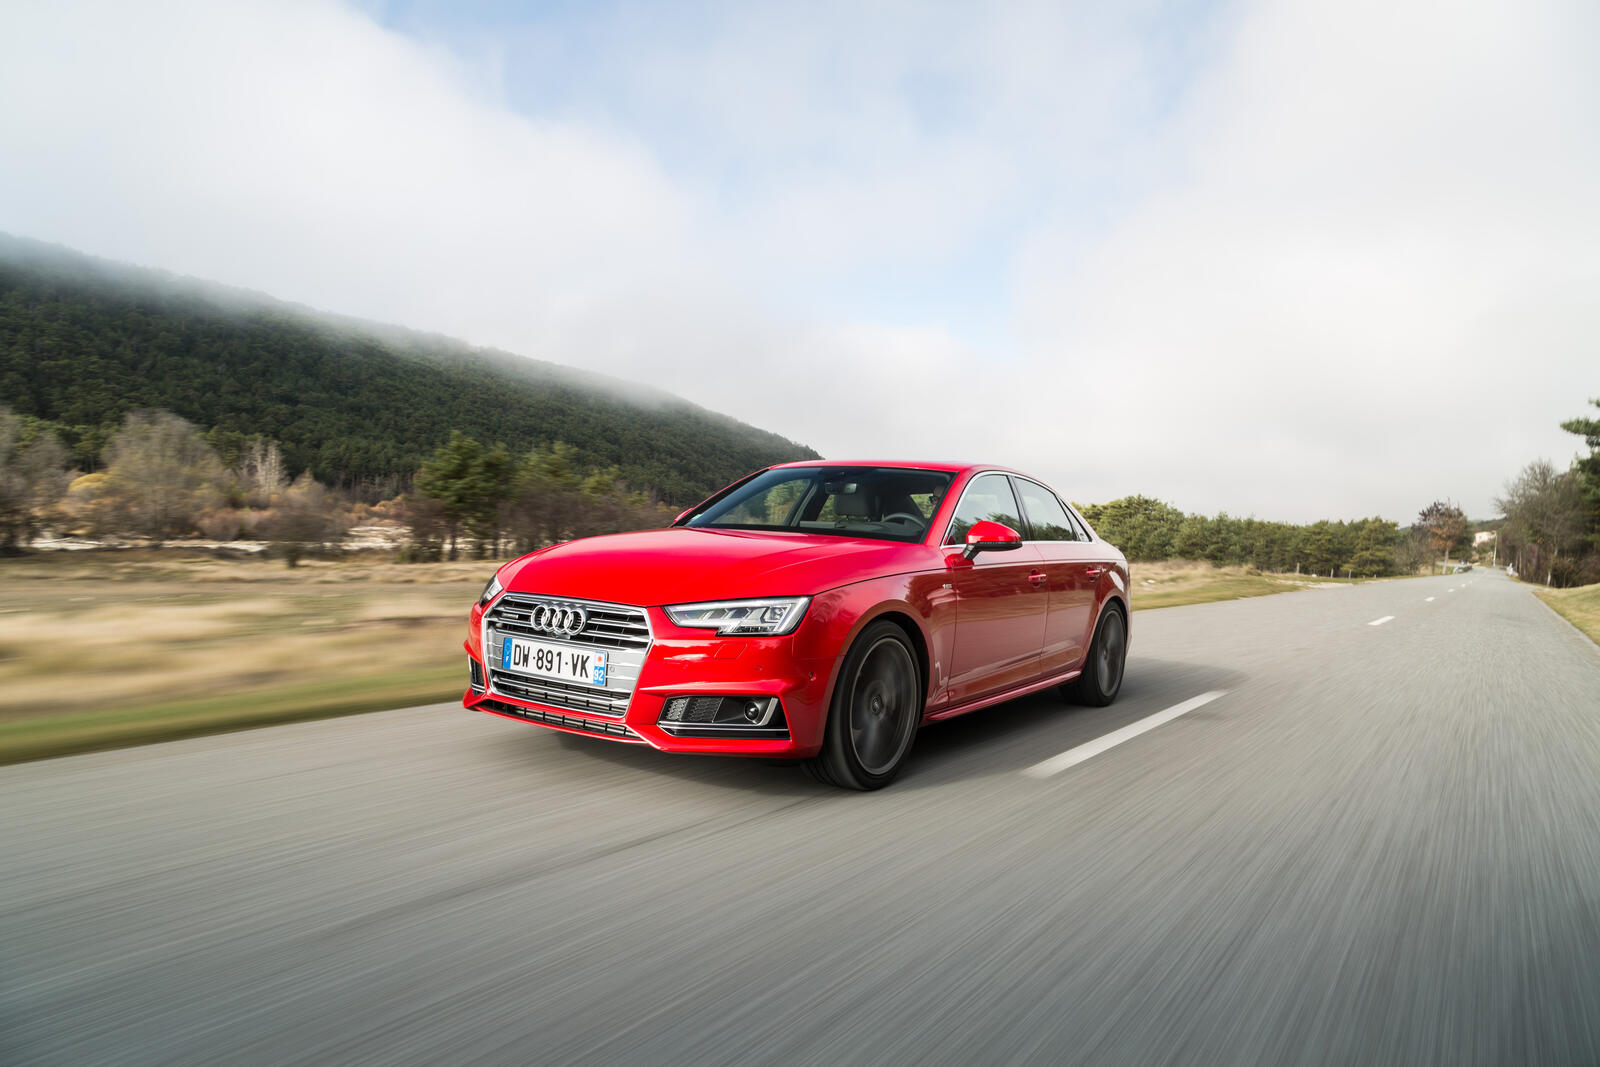 Free photo Wallpaper with red audi a4 quattro on the road